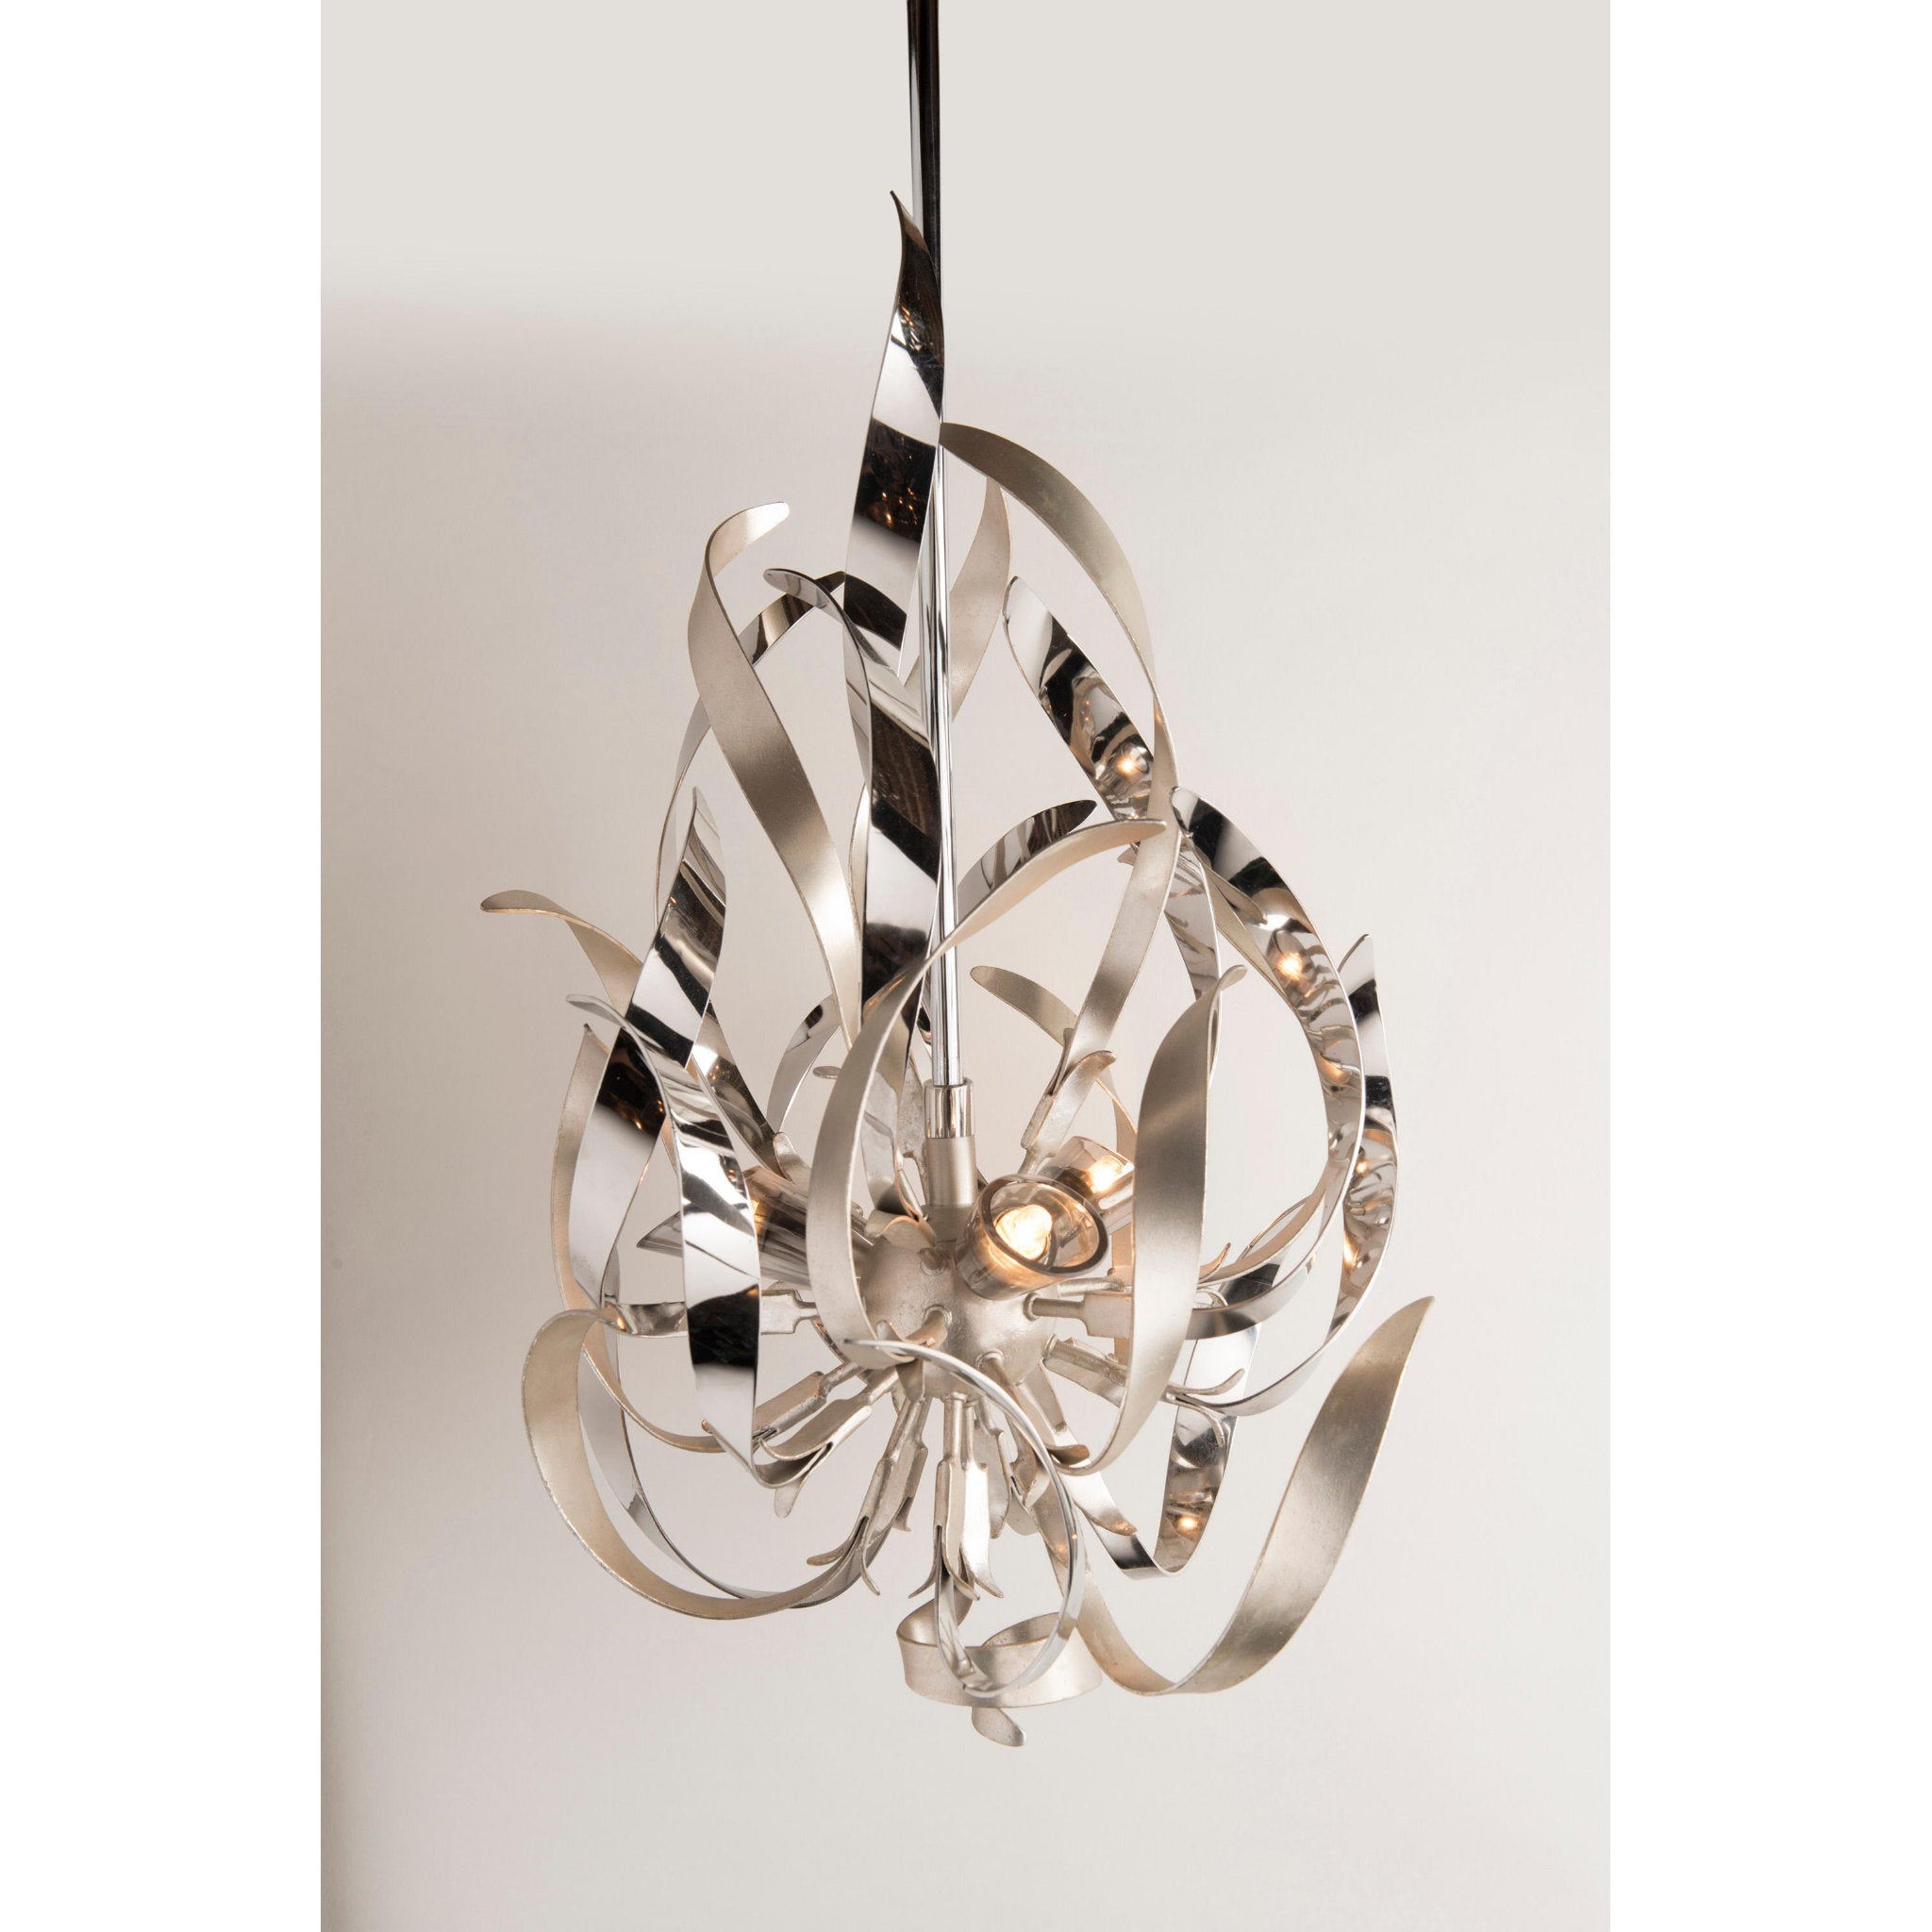 Graffiti 12 Light Chandelier in Silver Leaf Polished Stainless